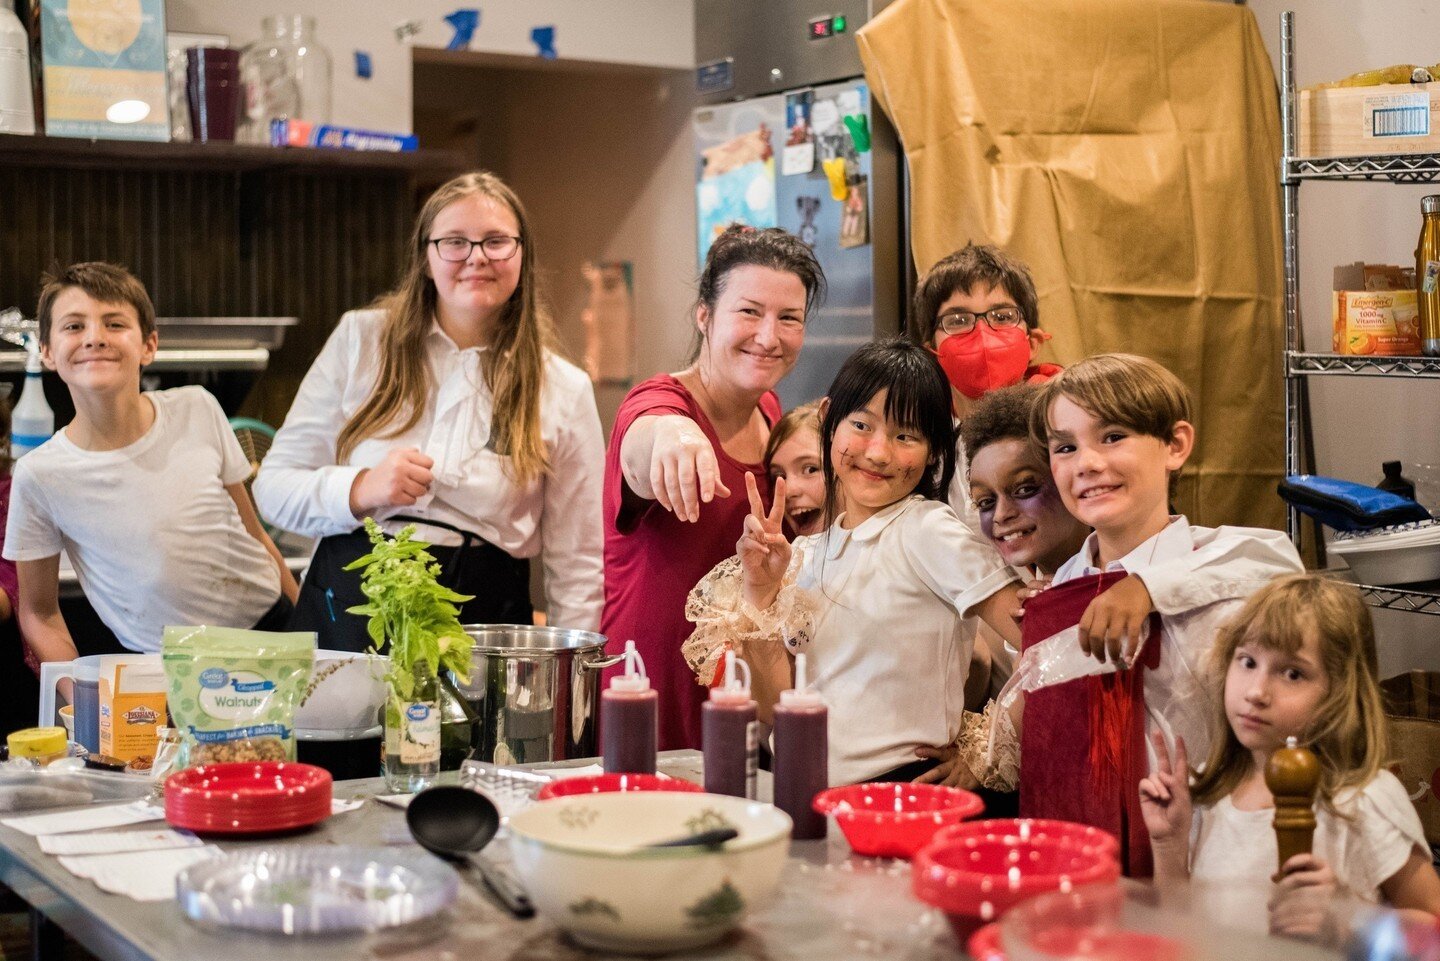 Summer Camp Spotlight ⭐️ July 22 - Aug 2: Culinary Arts and Set Design | Ages 9 - 13 | 2 weeks⁠
⁠
Calling all young culinary artists for the most delicious camp of the Summer! Over two weeks we&rsquo;ll transform the Tigermen Den into our very own, s